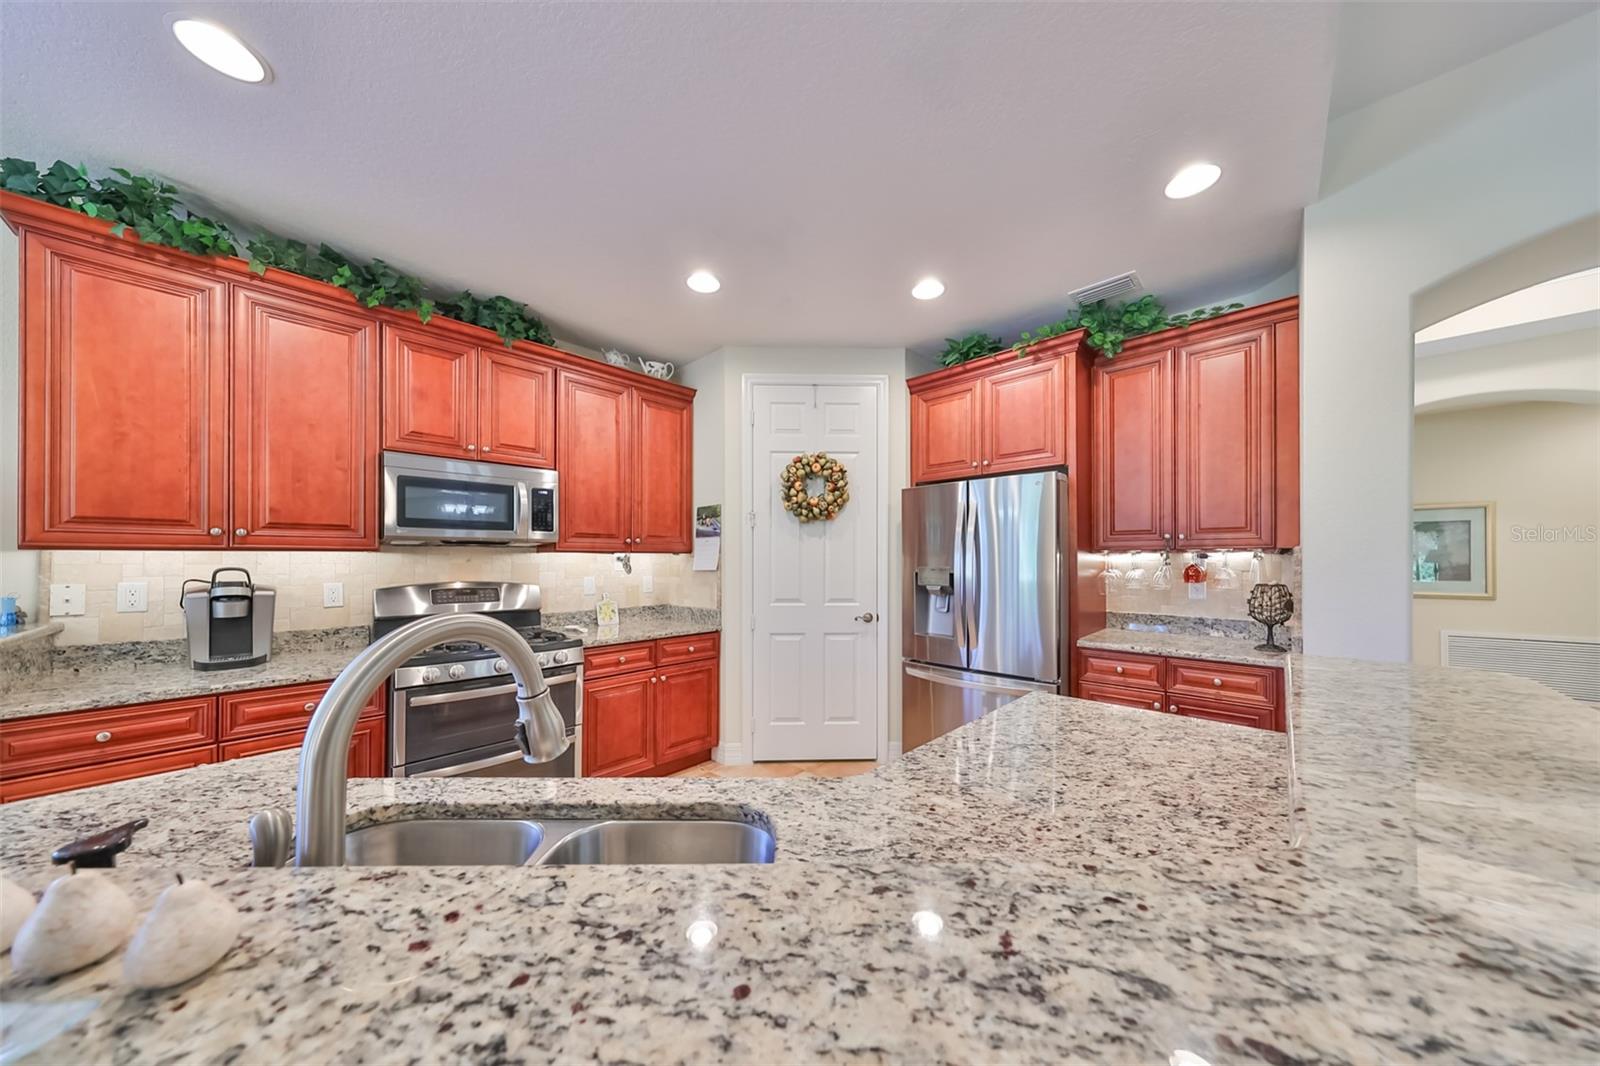 Kitchen is spacious, bright, open and inviting with an extra large counter to eat at and an undermount sink. Notice the recessed lighting in addition to the natural light that flows through the kitchen.  Lots of room for multiple cooks.